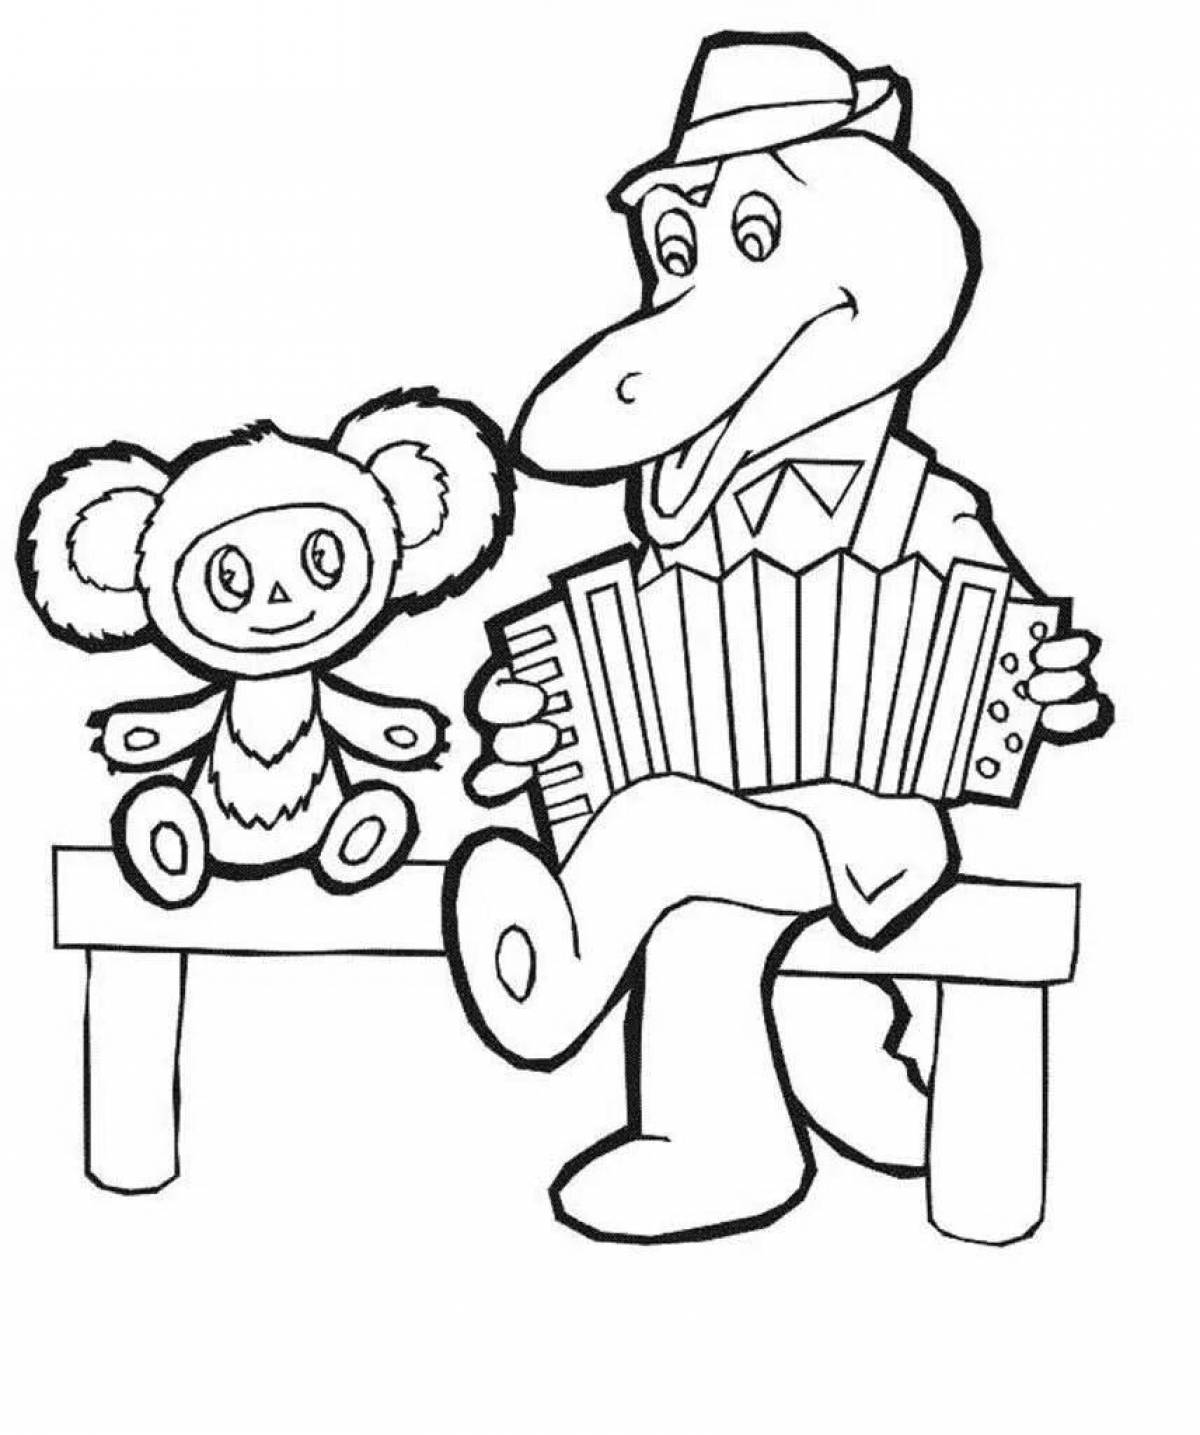 Colorful Cheburashka coloring book for children 5-6 years old